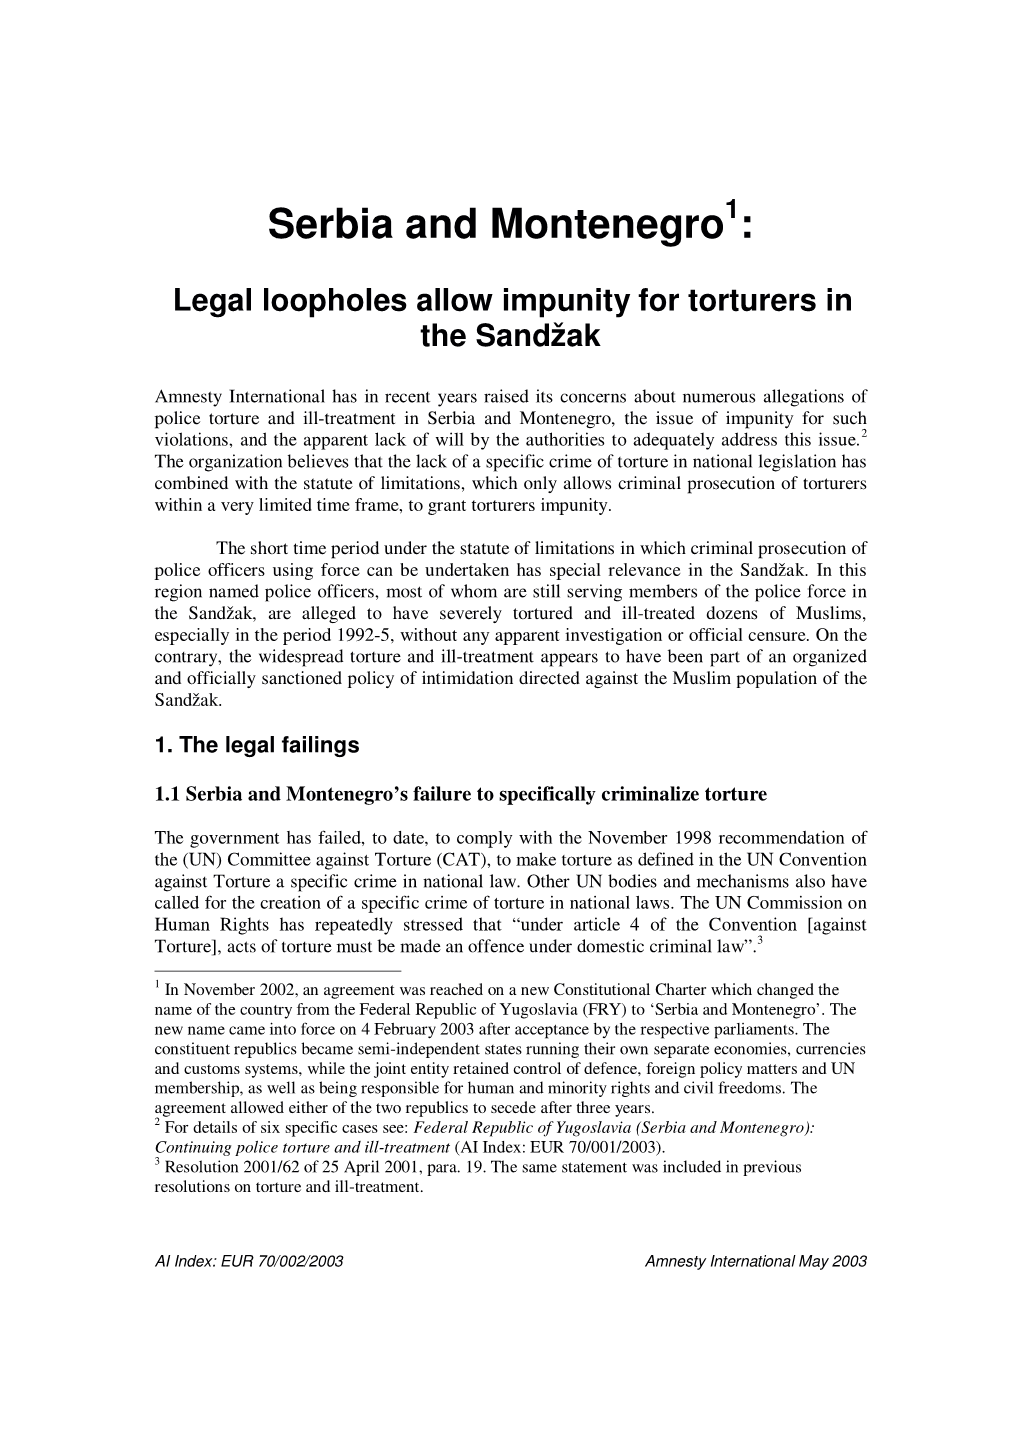 Serbia and Montenegro 1 : Legal Loopholes Allow Impunity